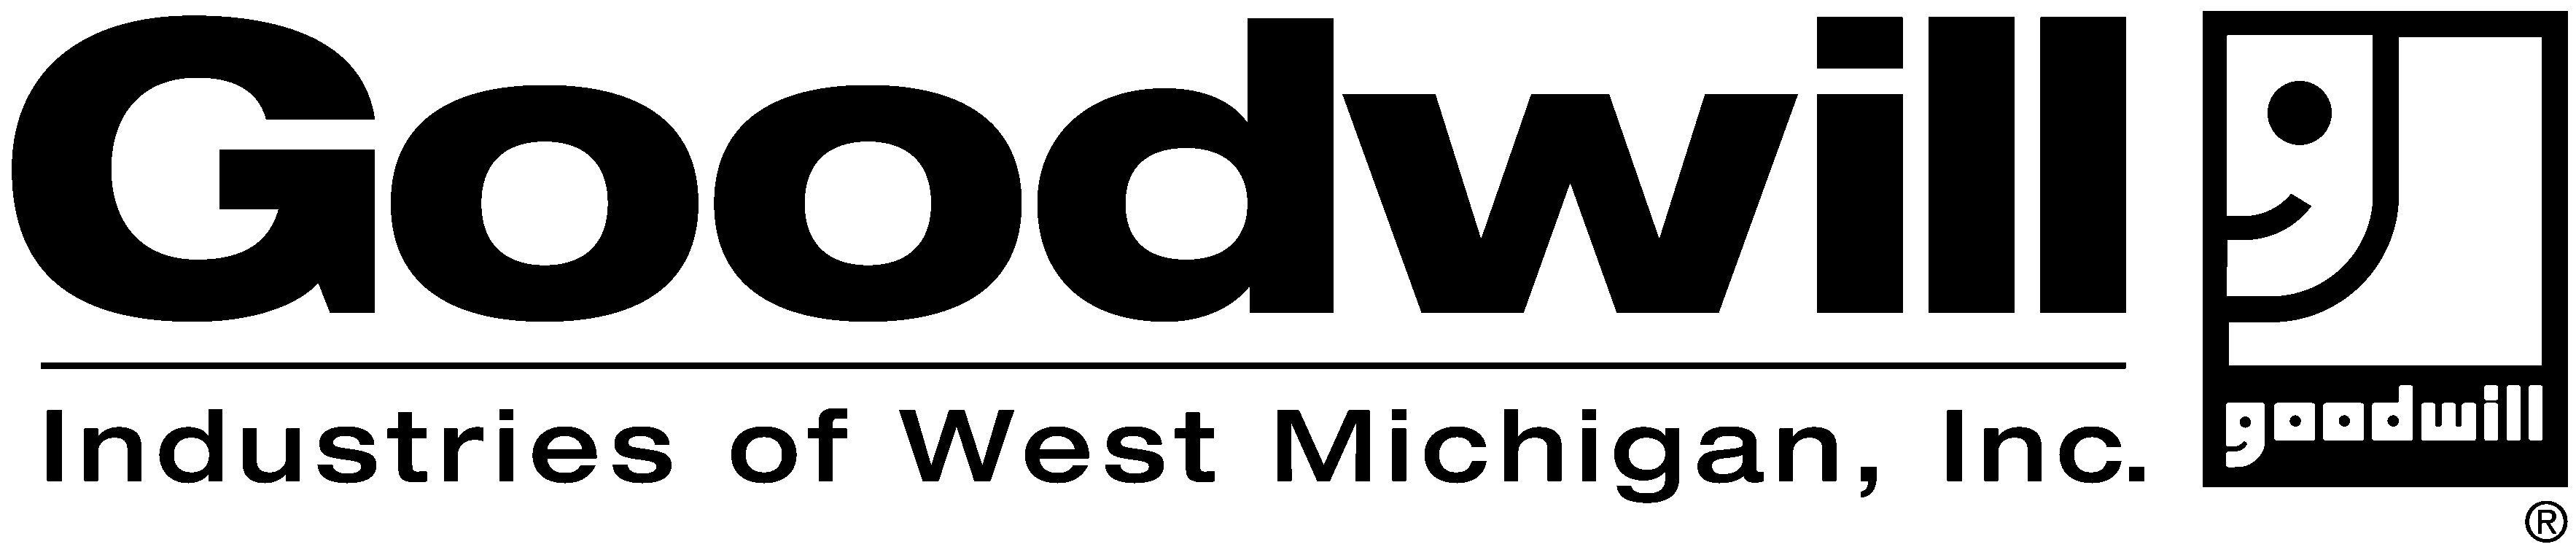 Goodwill Industries of West Michigan, Inc.